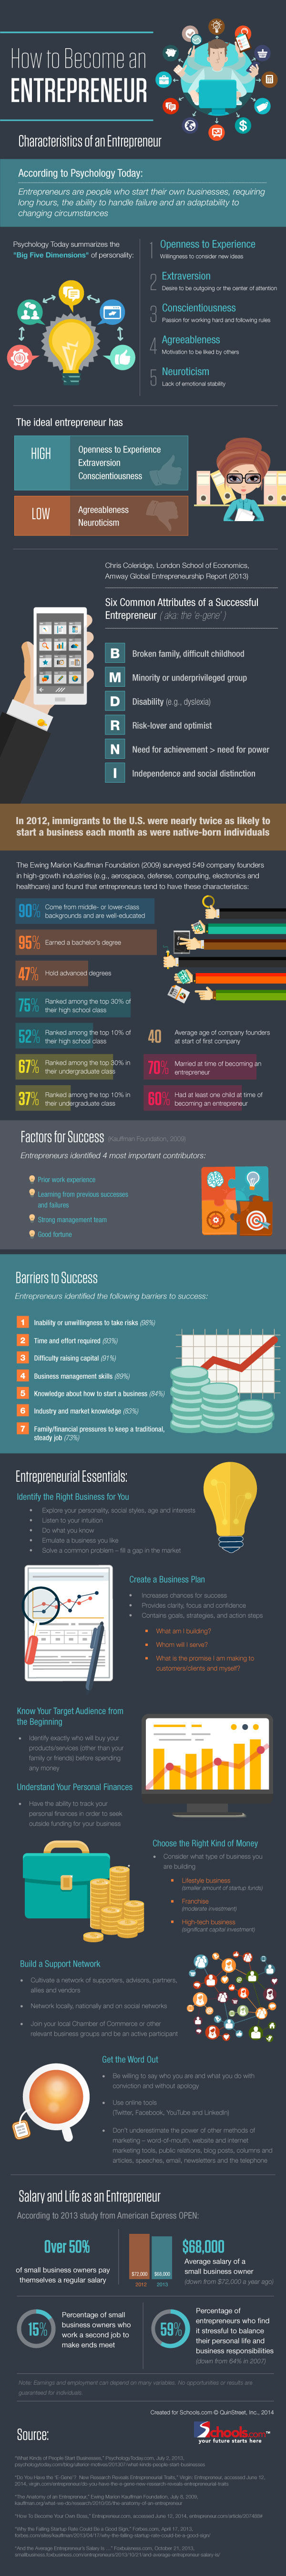 What Great Entrepreneurs Have in Common (Infographic)